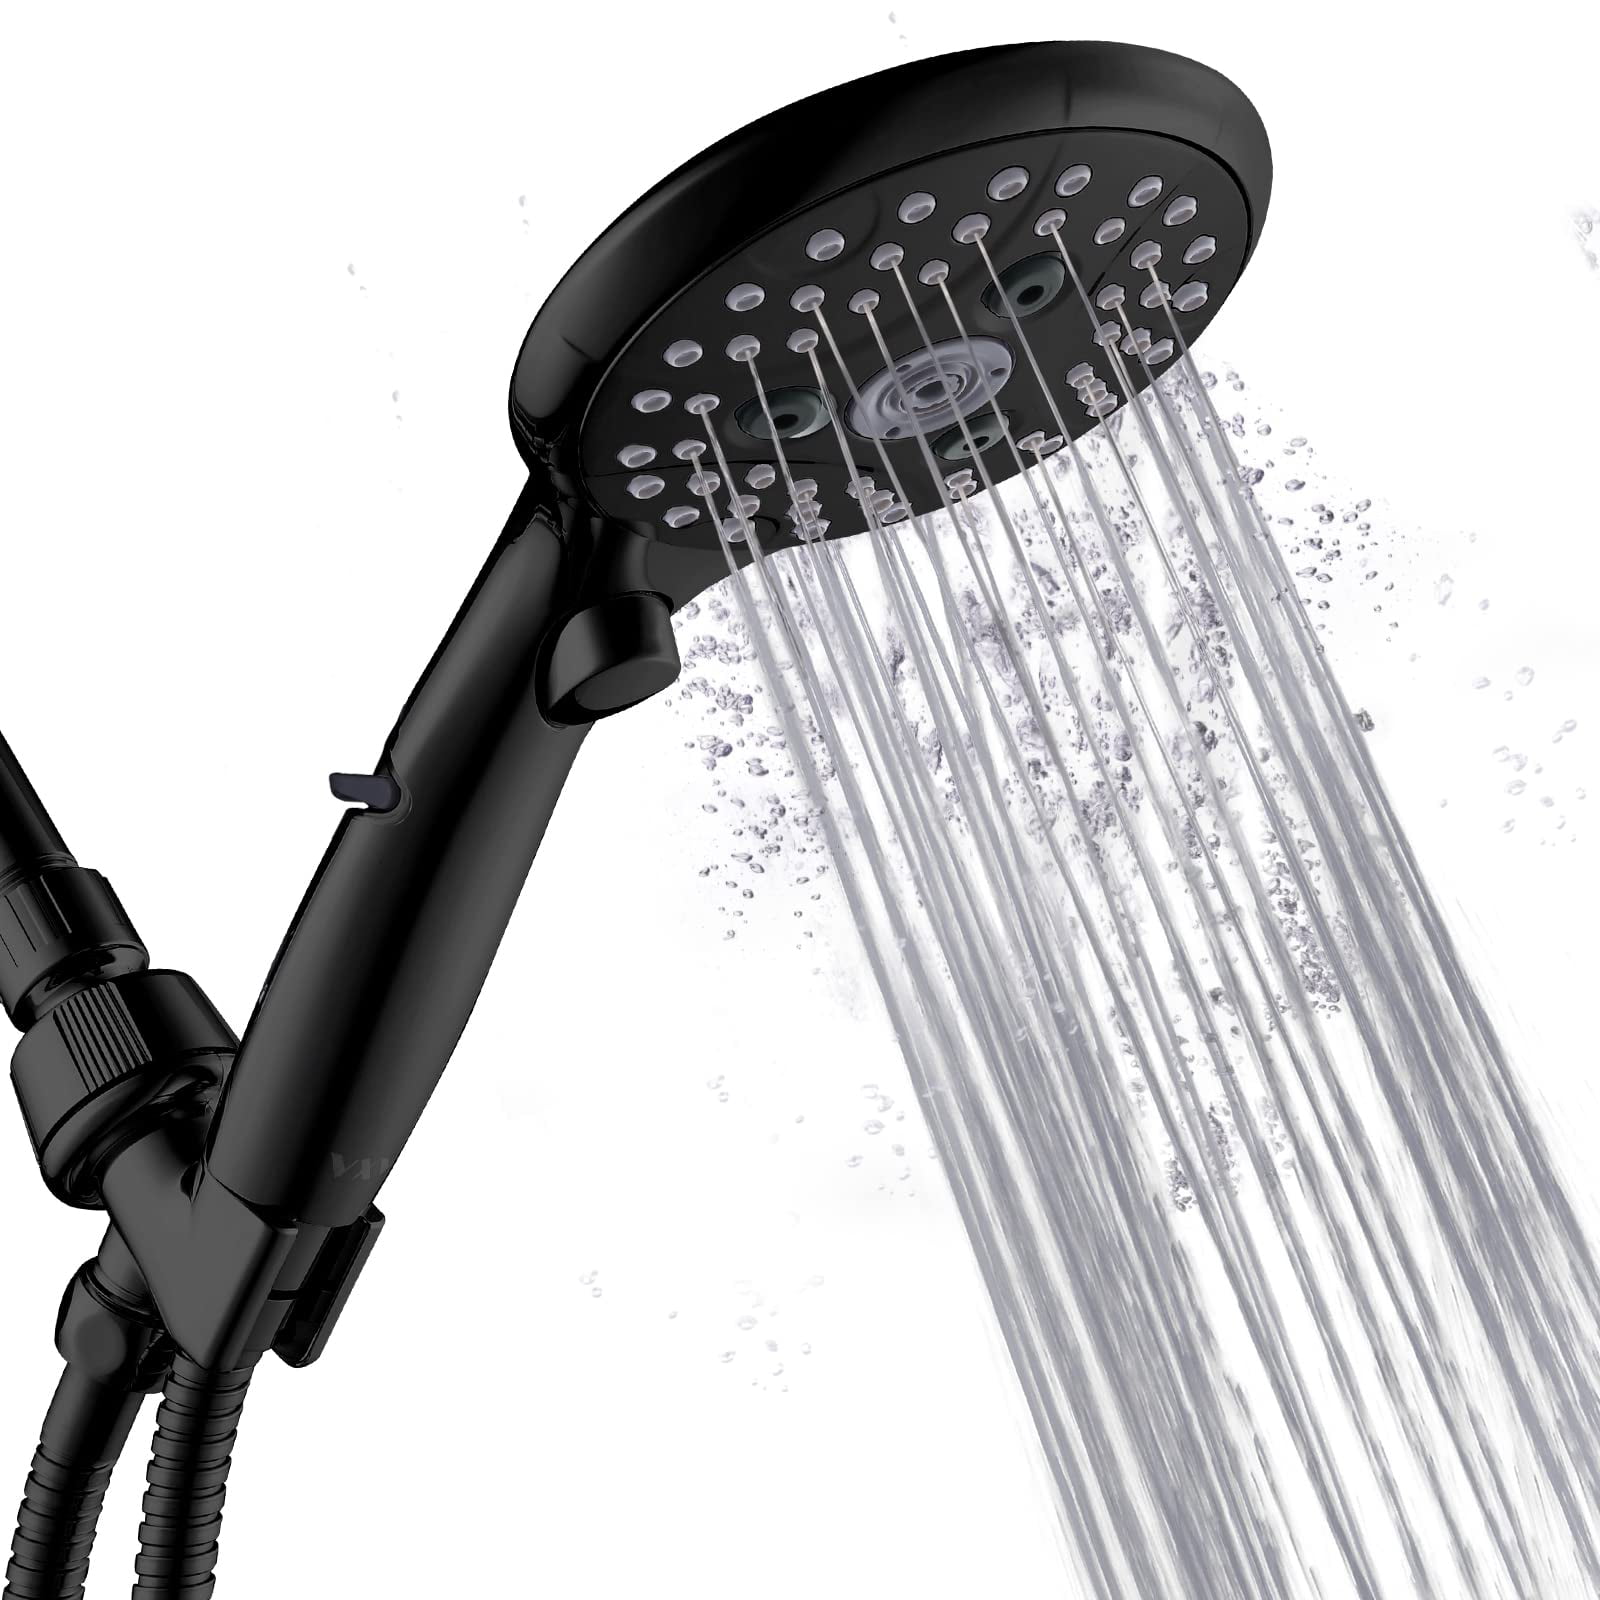 VXV Bathroom Handheld Shower Head with on off Switch 6 Spray Setting Removable Hand Held Showerheads with 6 FT Stainless steel Hose and Adjustable Angle Bracket Matte Black